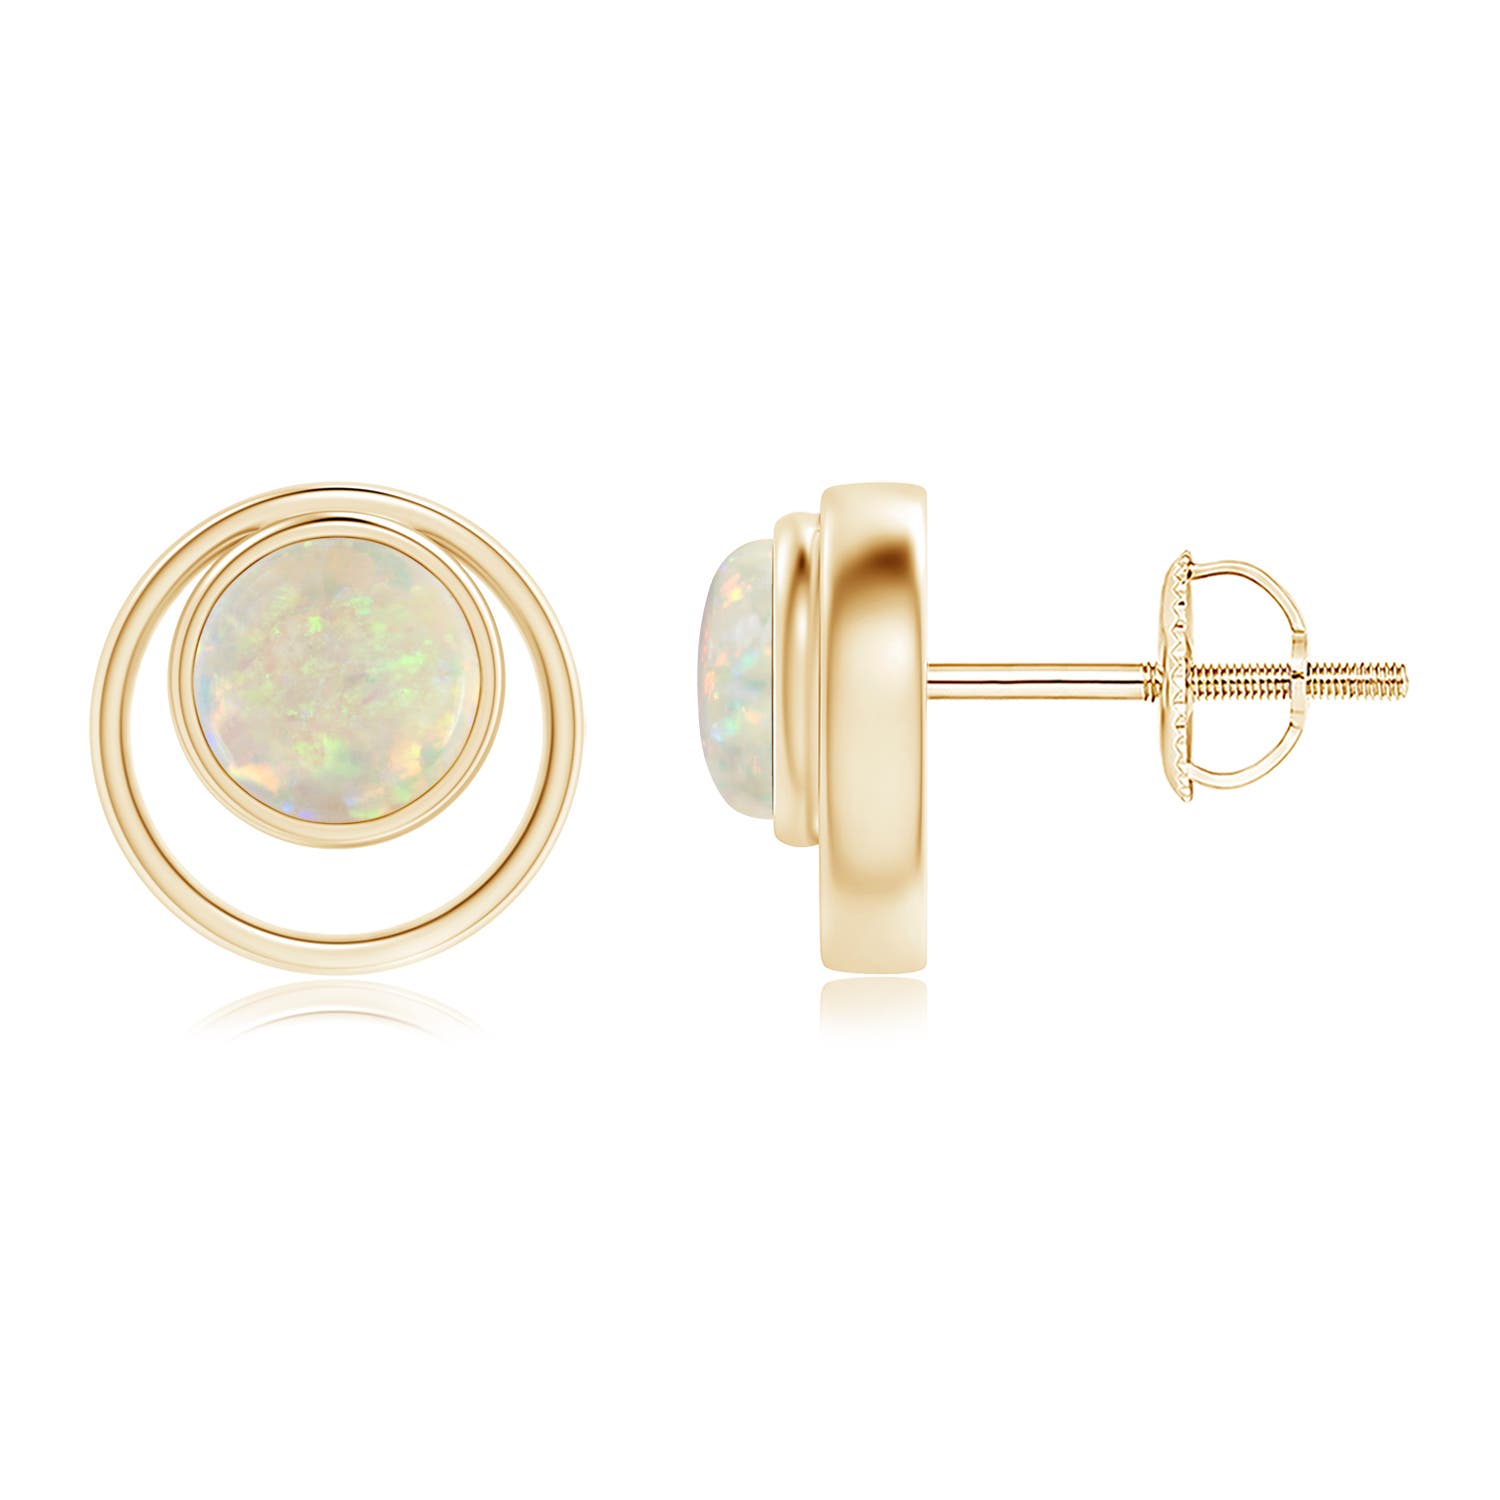 AAA - Opal / 0.66 CT / 14 KT Yellow Gold